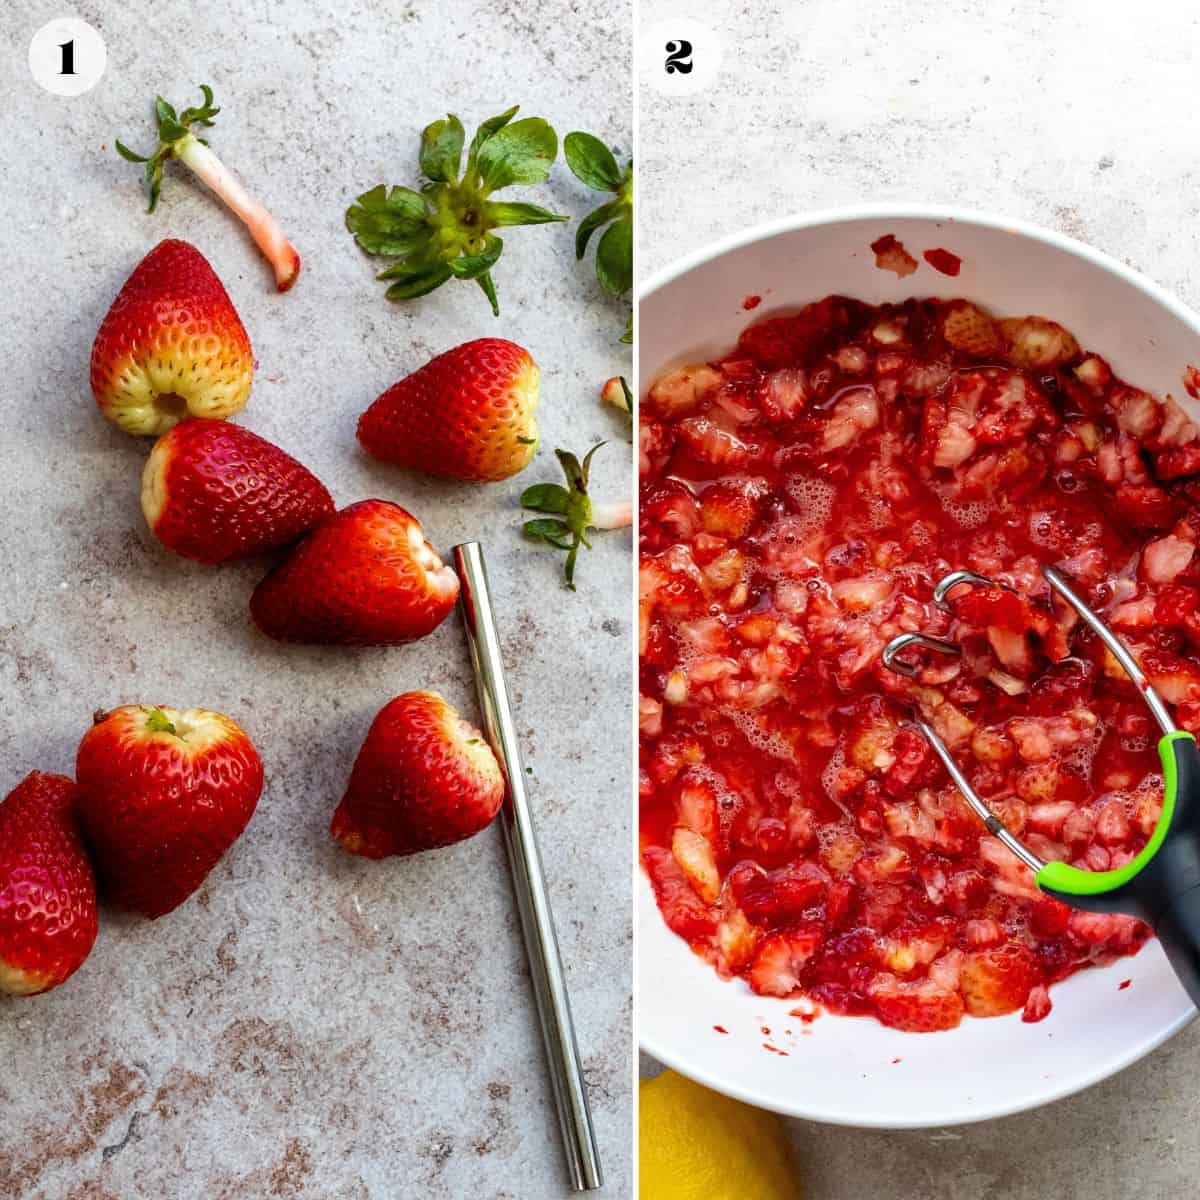 A collage of two images showing strawberries being mashed in a bowl.